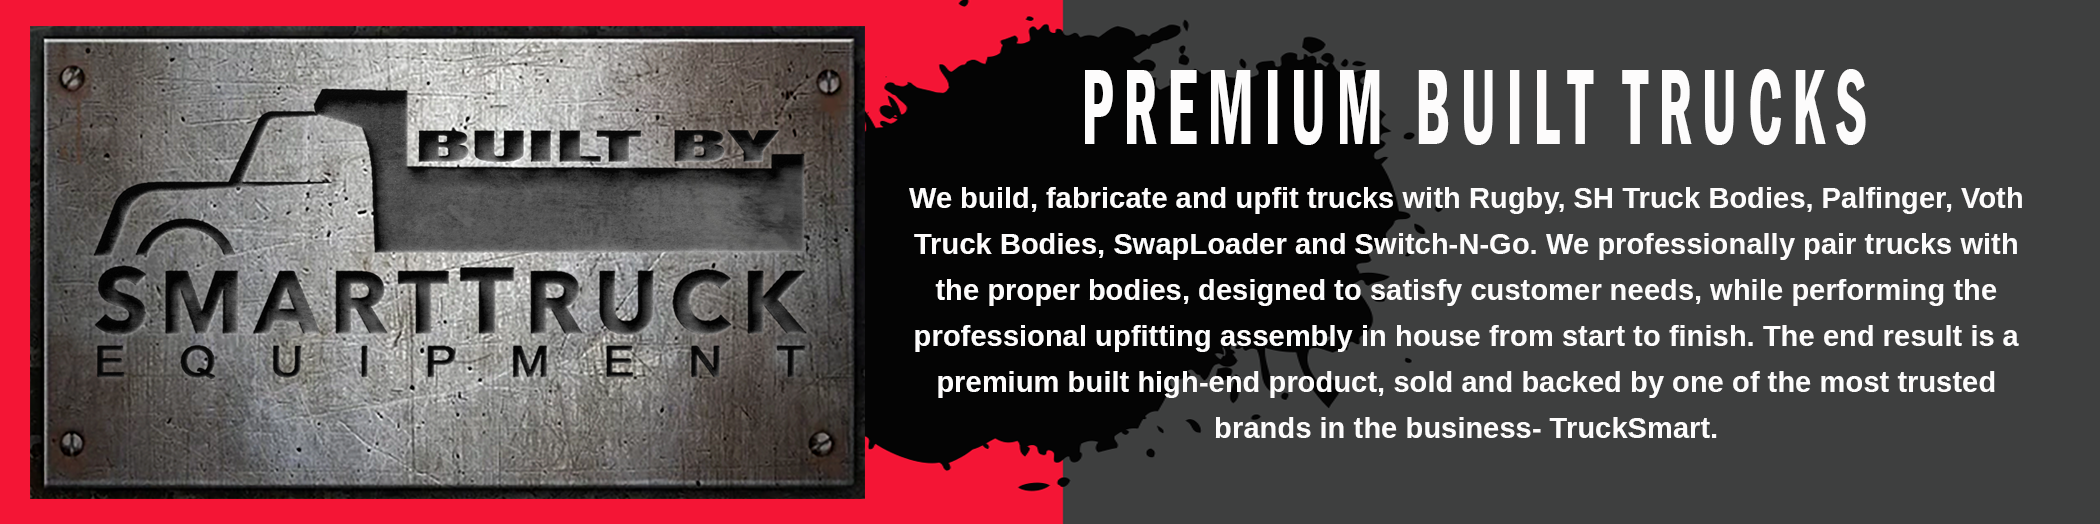 We build, fabricate and upfit trucks with Rugby, SH Truck Bodies, Palfinger, Voth Truck Bodies, SwapLoader and Switch-N-Go. We professionally pair trucks with the proper bodies, designed to satisfy customer needs, while performing the professional upfitting assembly in house from start to finish.